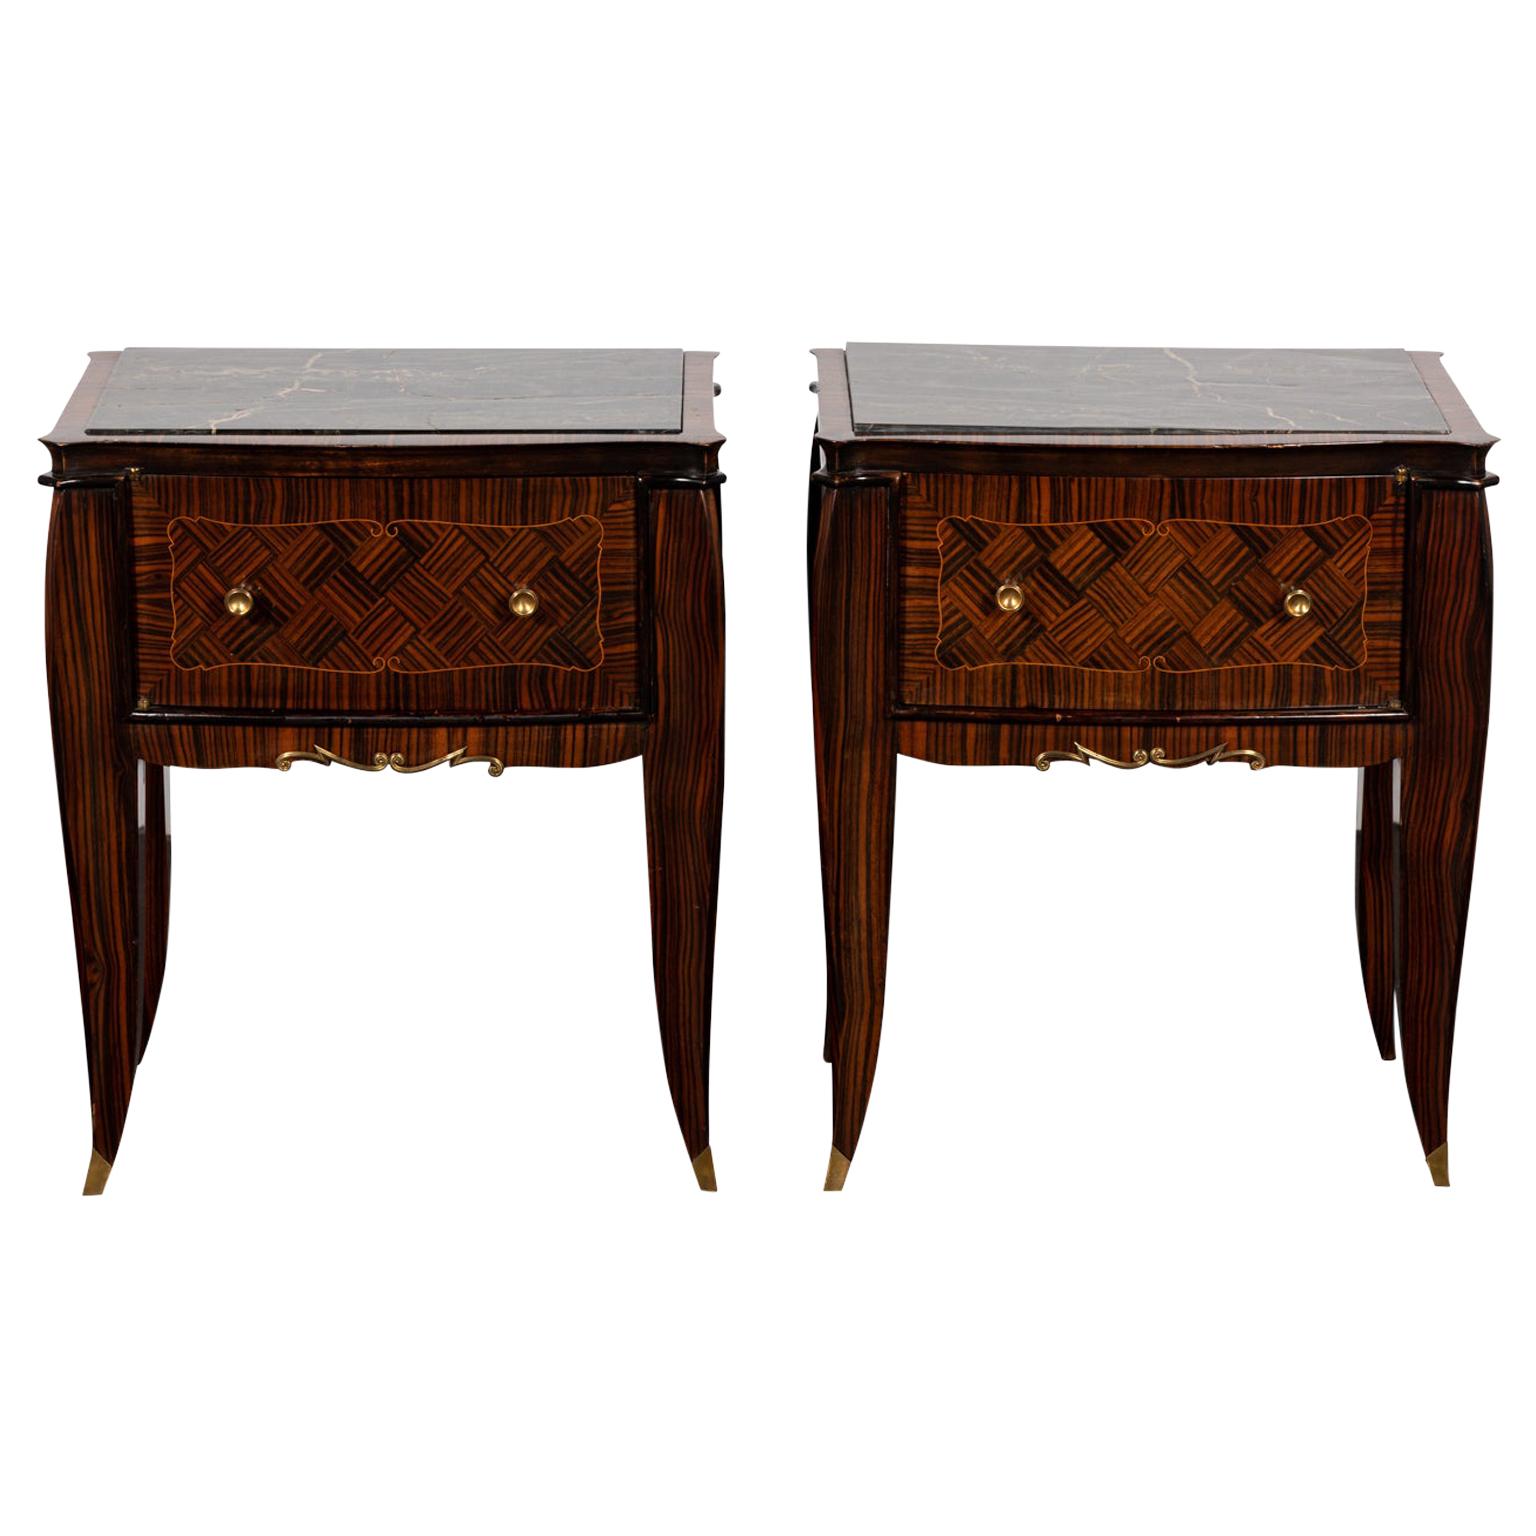 Pair of Art Deco Style Nightstands with Drawers